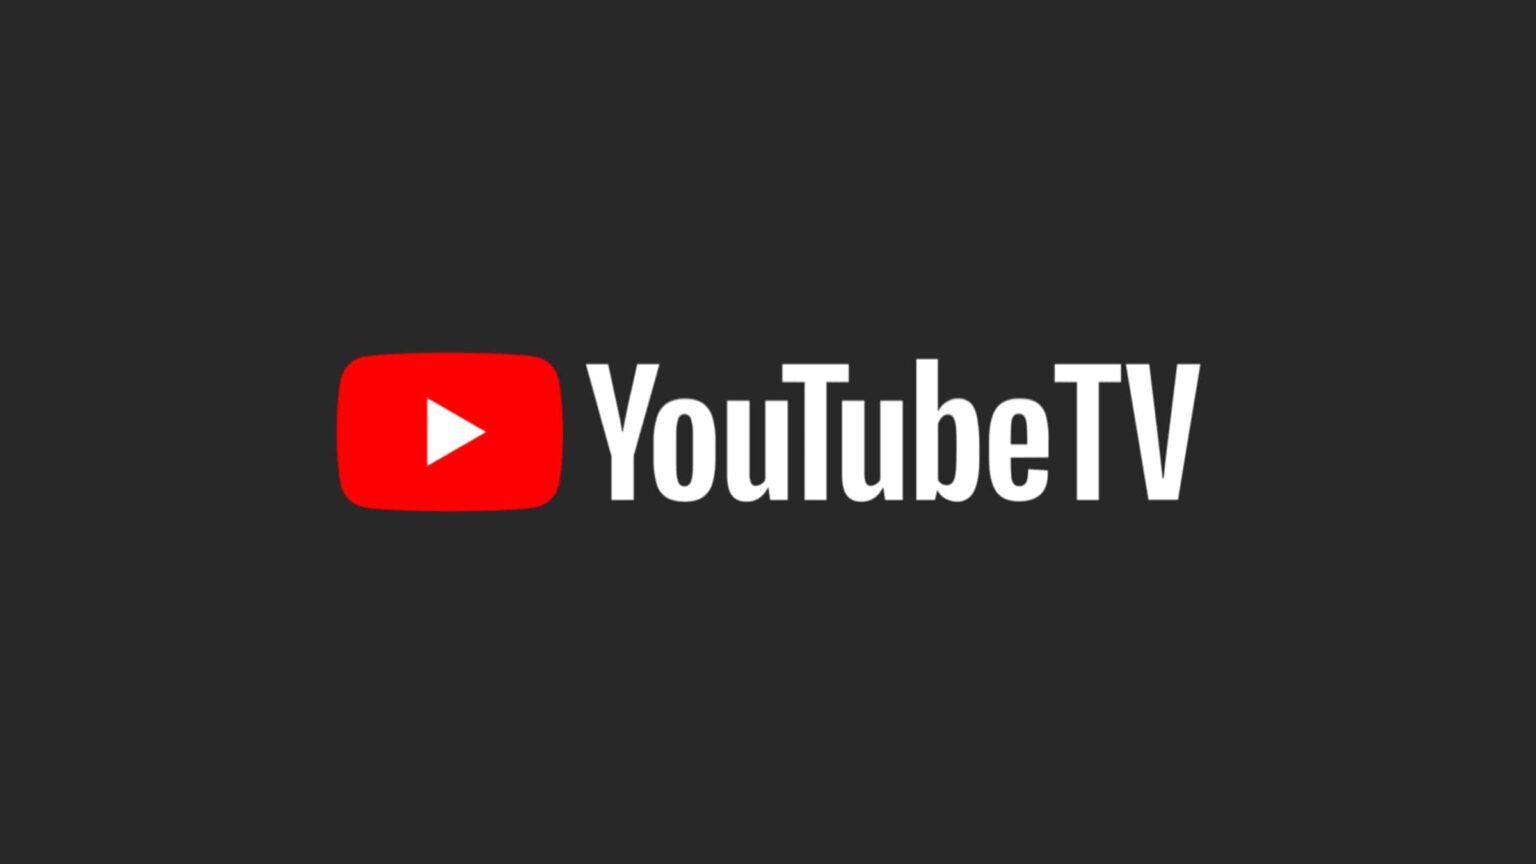 Is YouTube TV worth the price? Depends on what you're looking for. Check out what the platform has to offer and see if it's right for you.